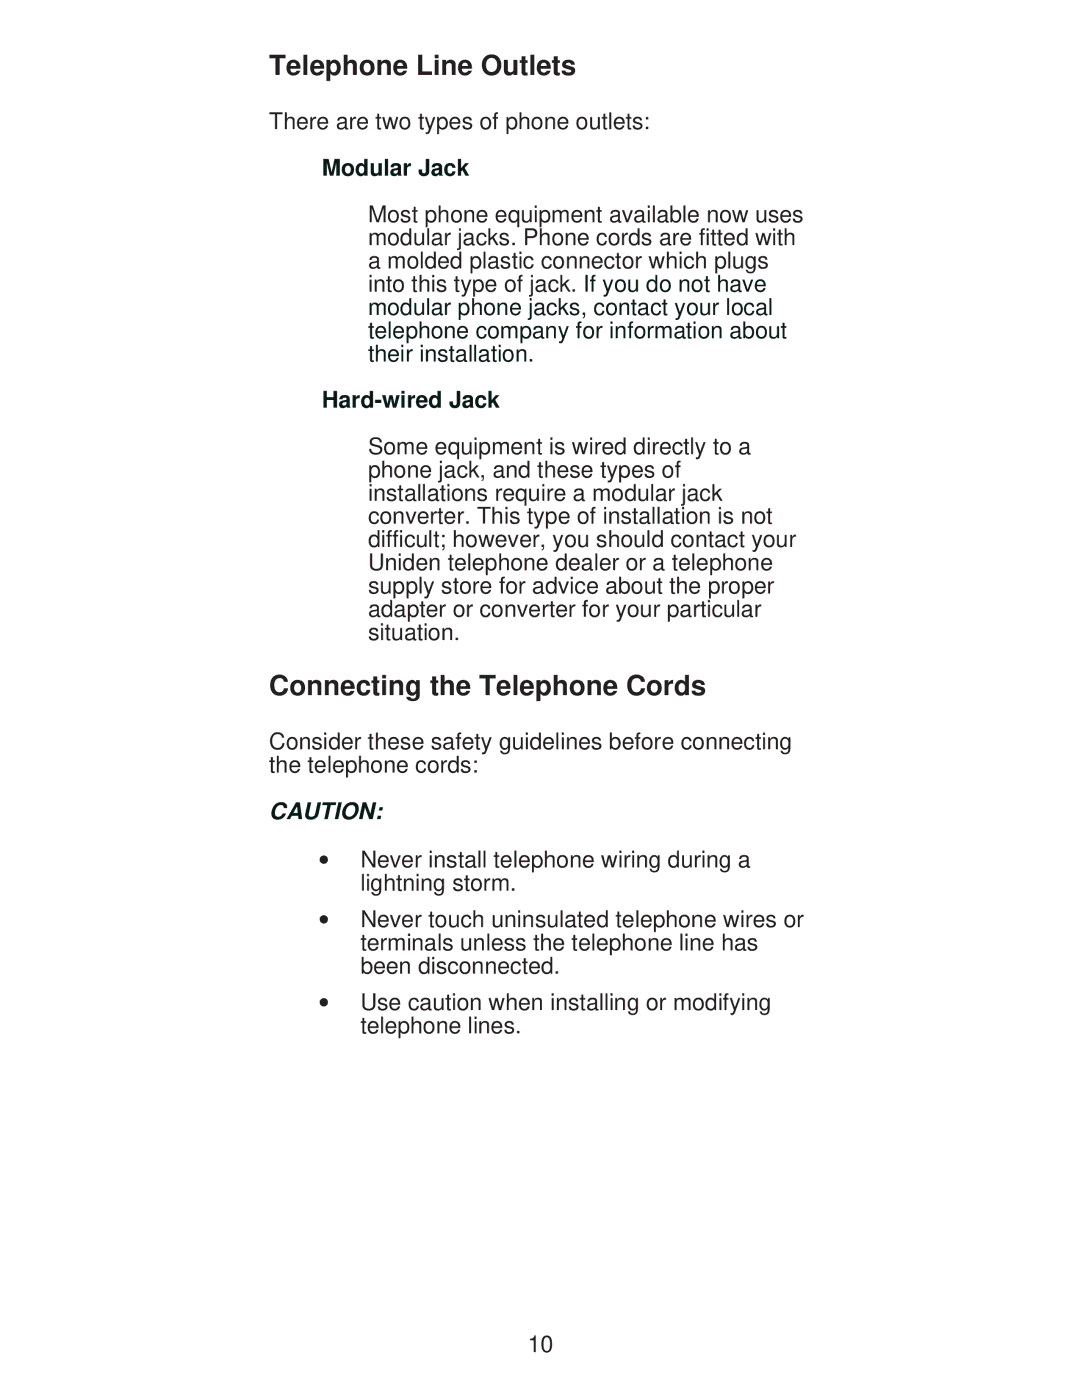 Uniden XC600/700 important safety instructions Telephone Line Outlets, Connecting the Telephone Cords 